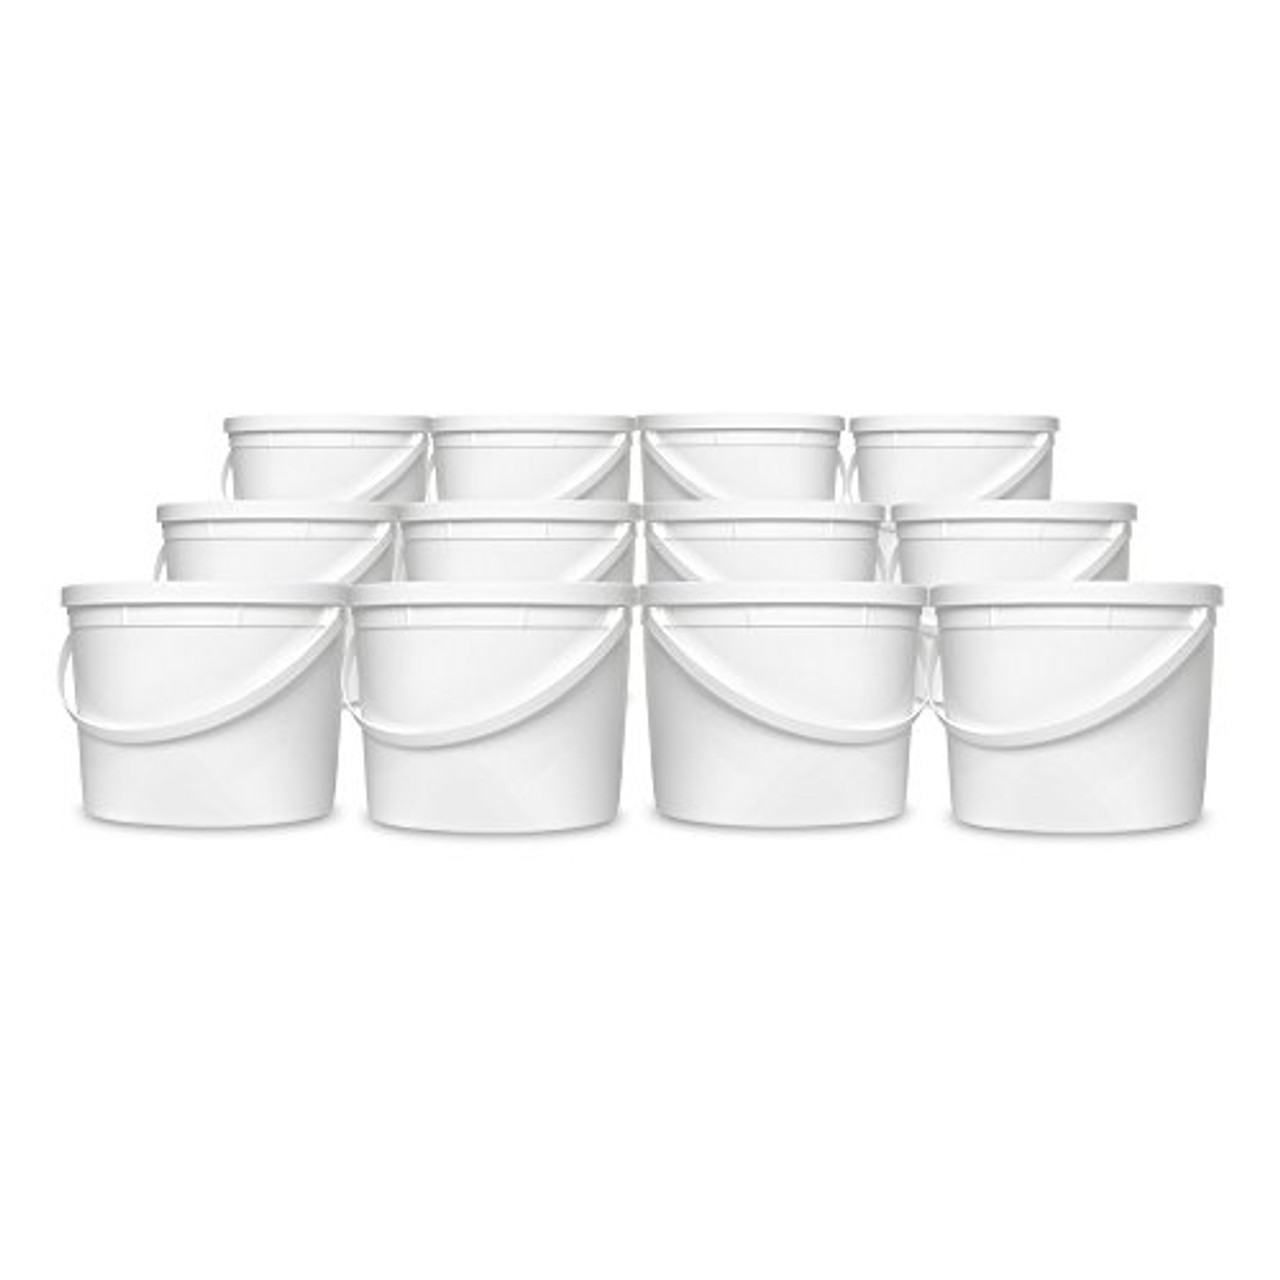 5 Gallon Natural Plastic Bucket Only - Durable 90 Mil All Purpose Pail -  Food Grade Buckets NO LIDS Included - Contains No BPA Plastic - Recyclable  